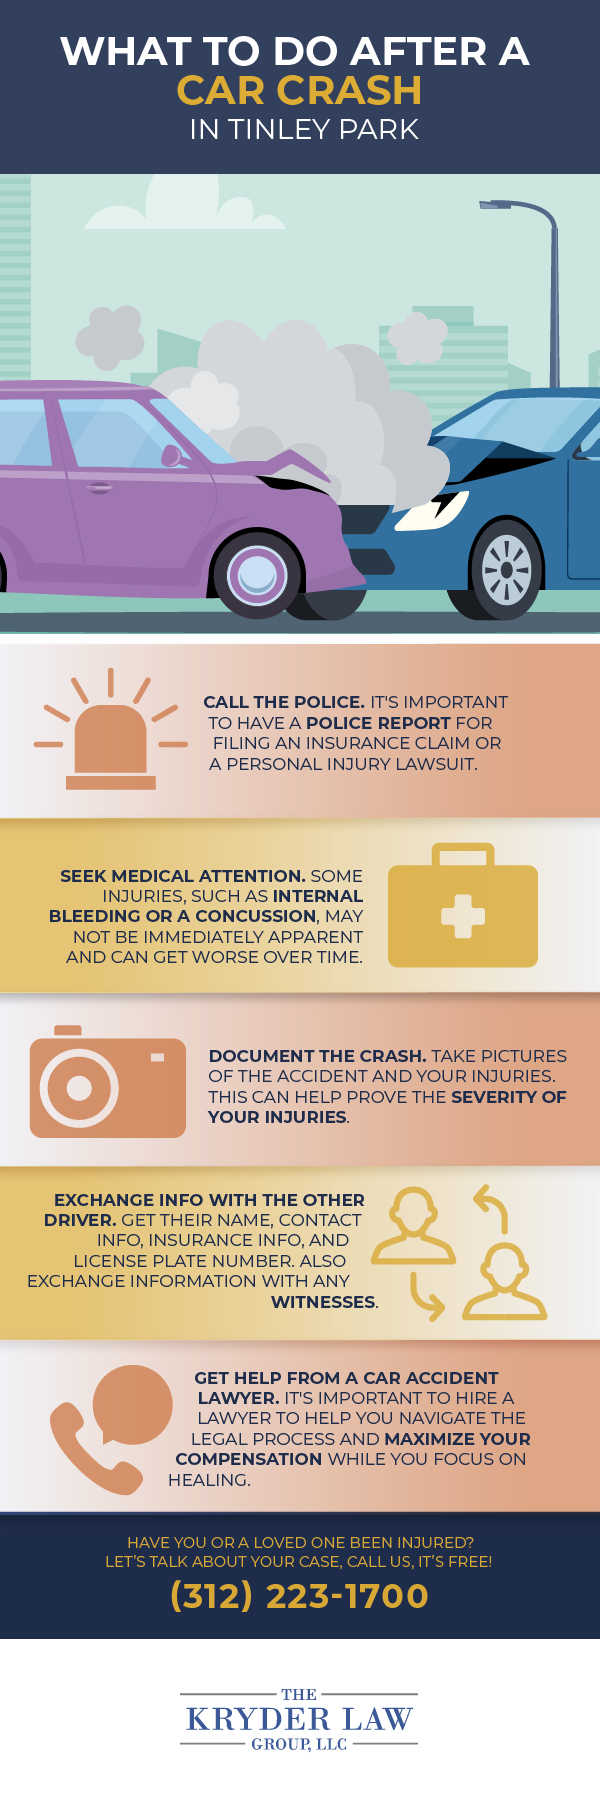 The Benefits of Hiring a Tinley Park Car Accident Lawyer Infographic